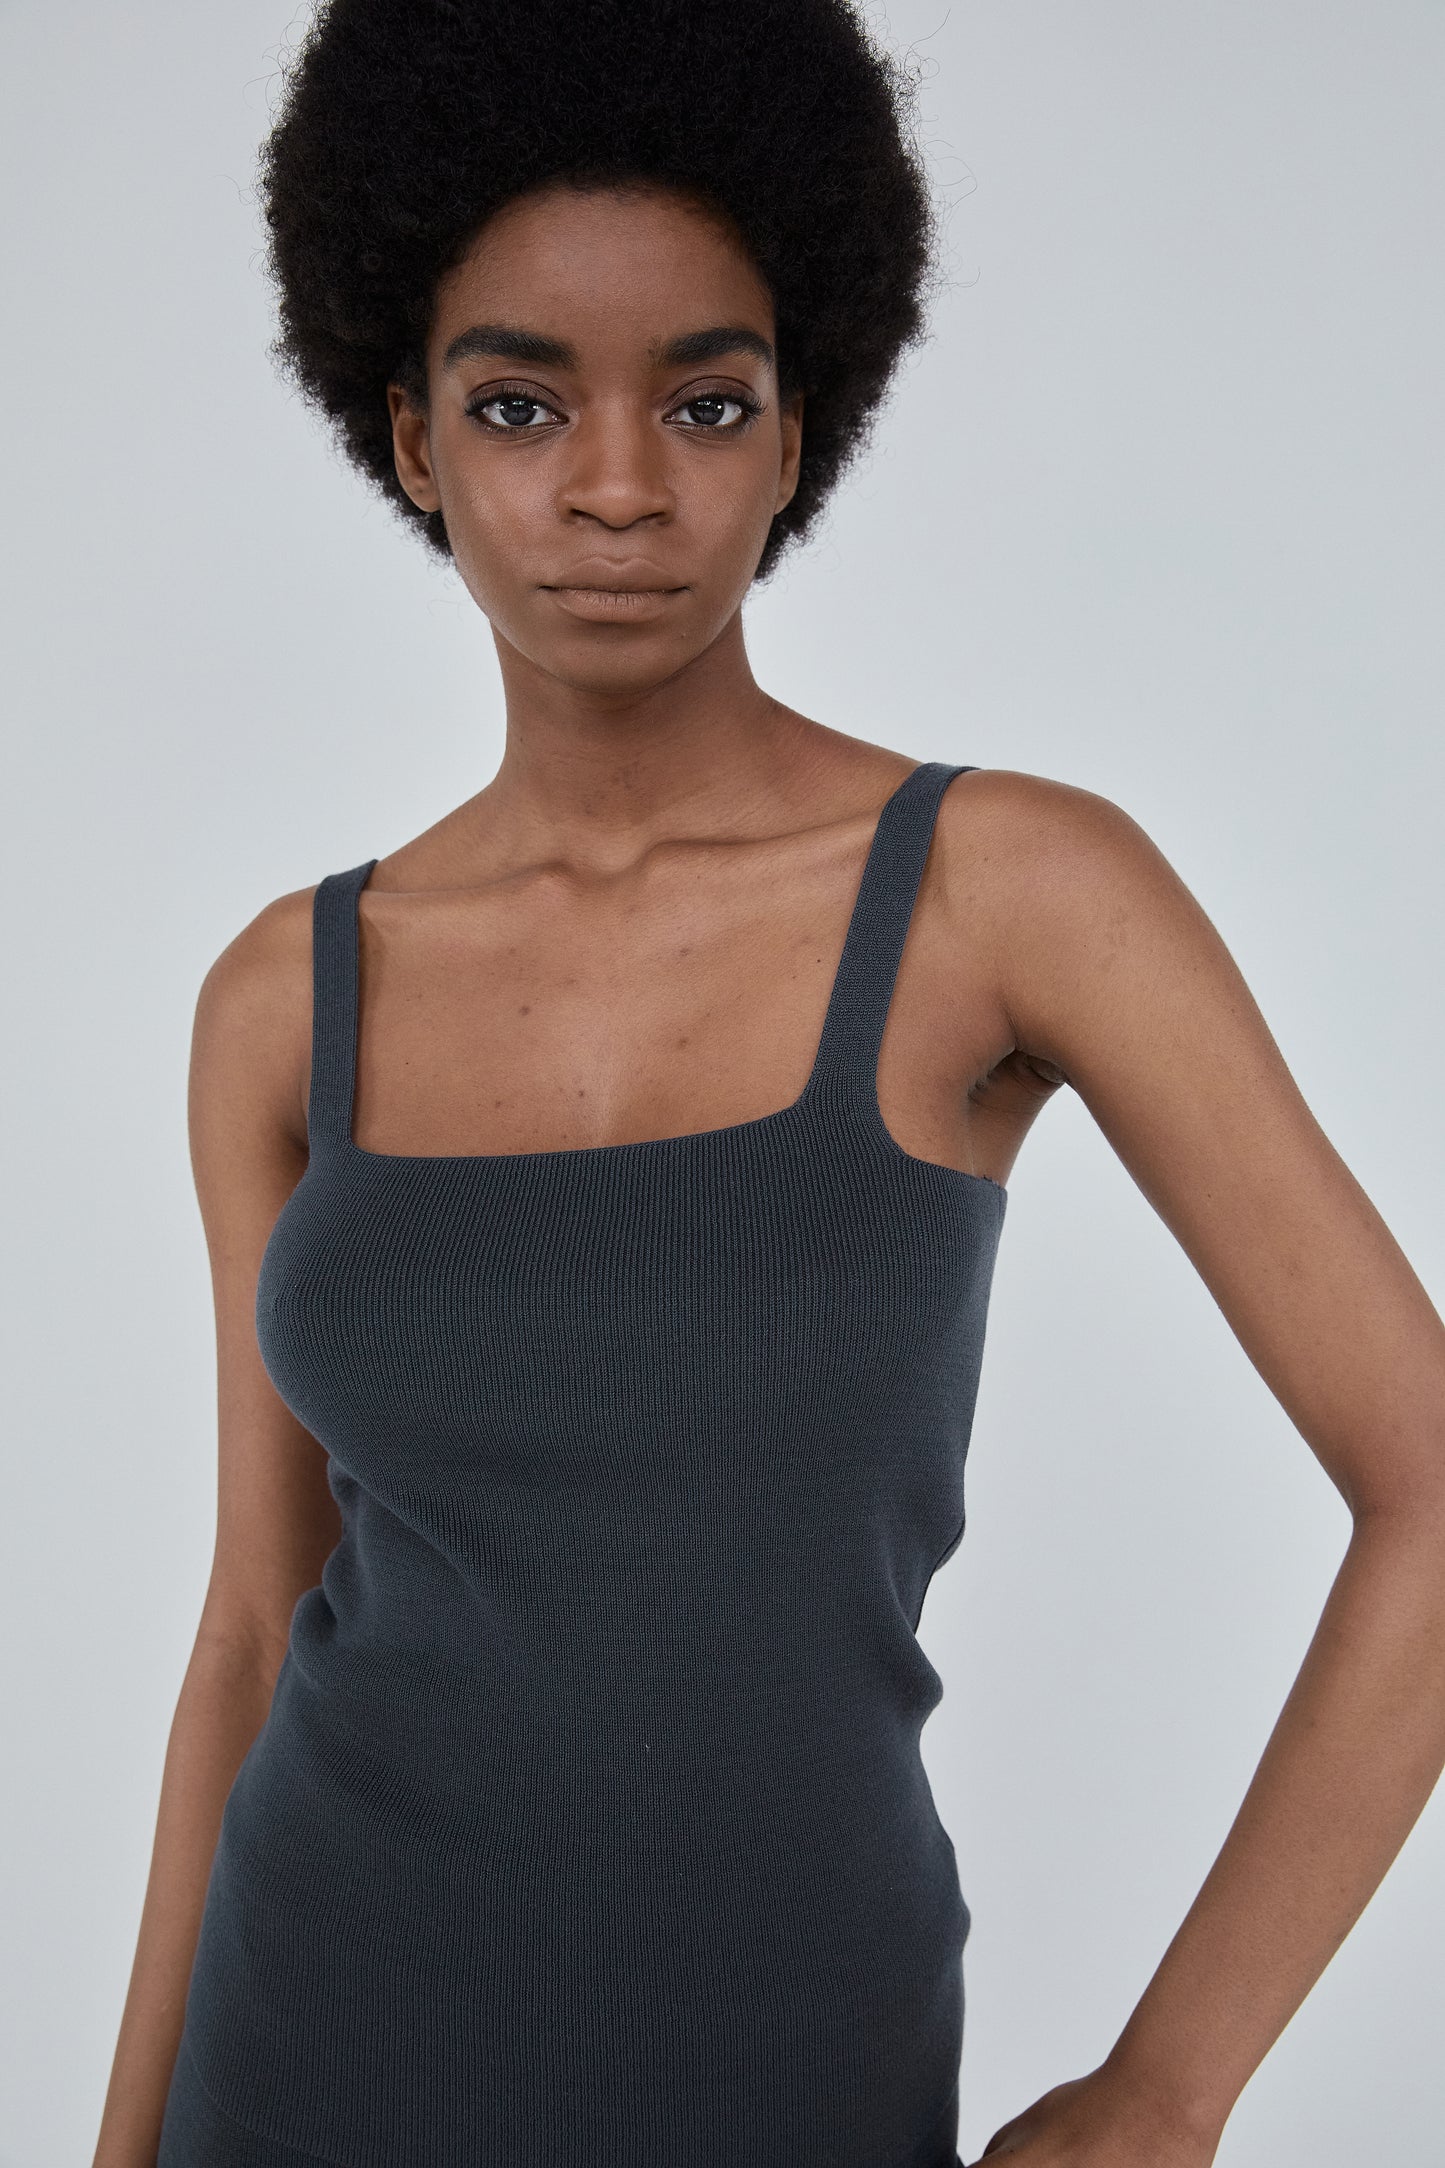 Square-Neckline Stretchy Knit Top, Charcoal